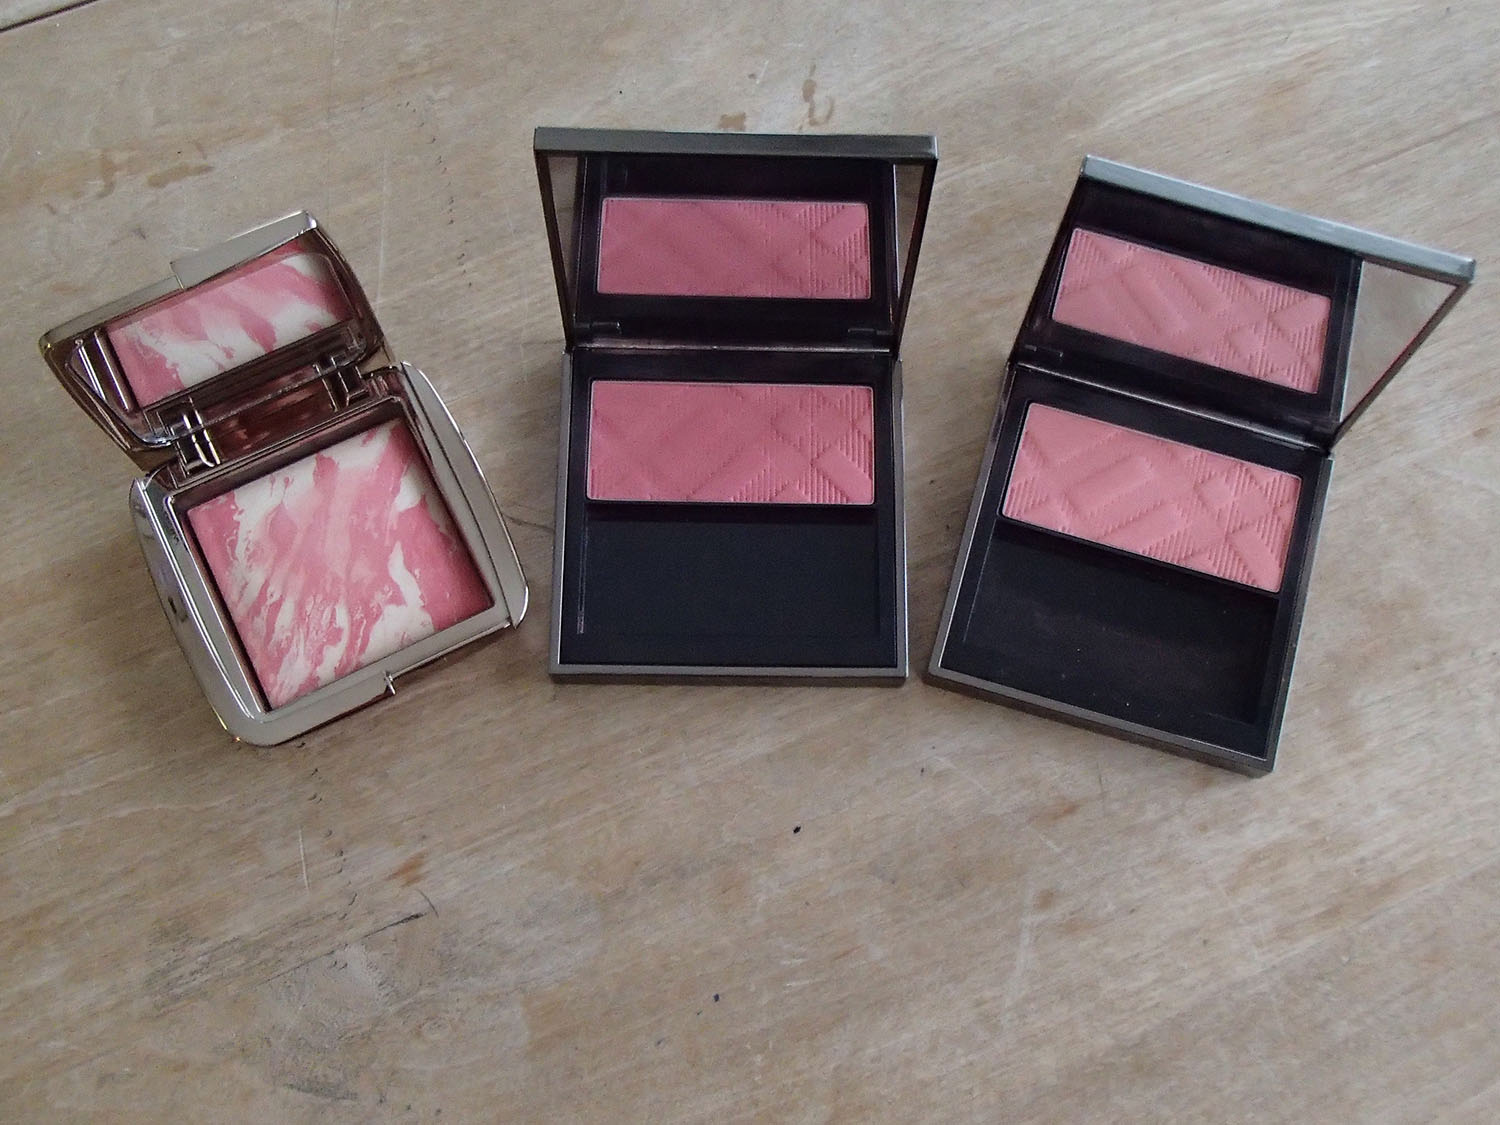 Hourglass Ambient Lighting Blush Diffused Heat Comparison